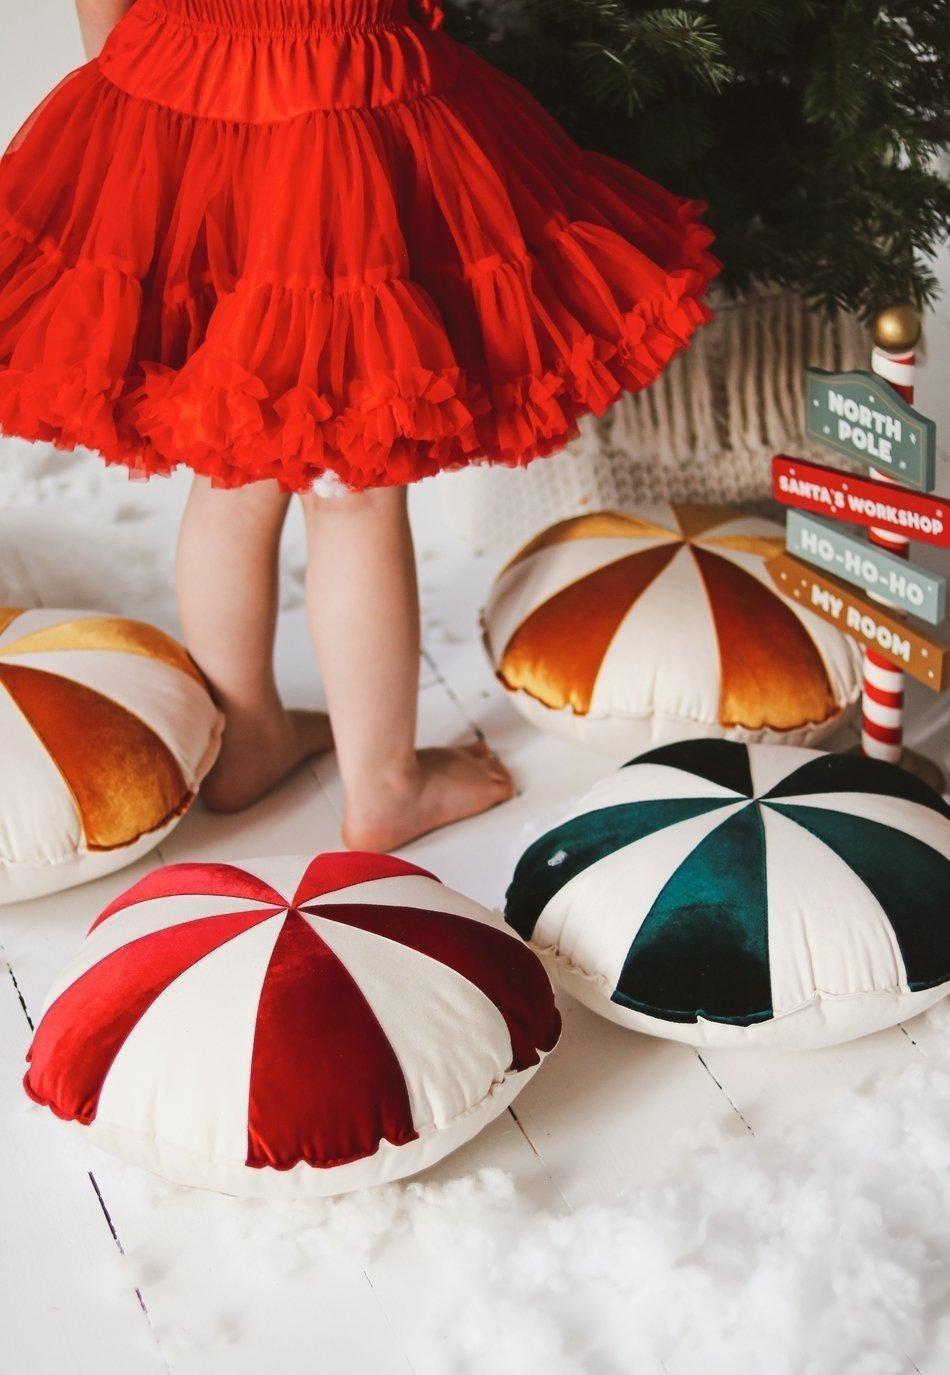 Round Patchwork Pillow “Red Circus” | Kids Room & Nursery Decor